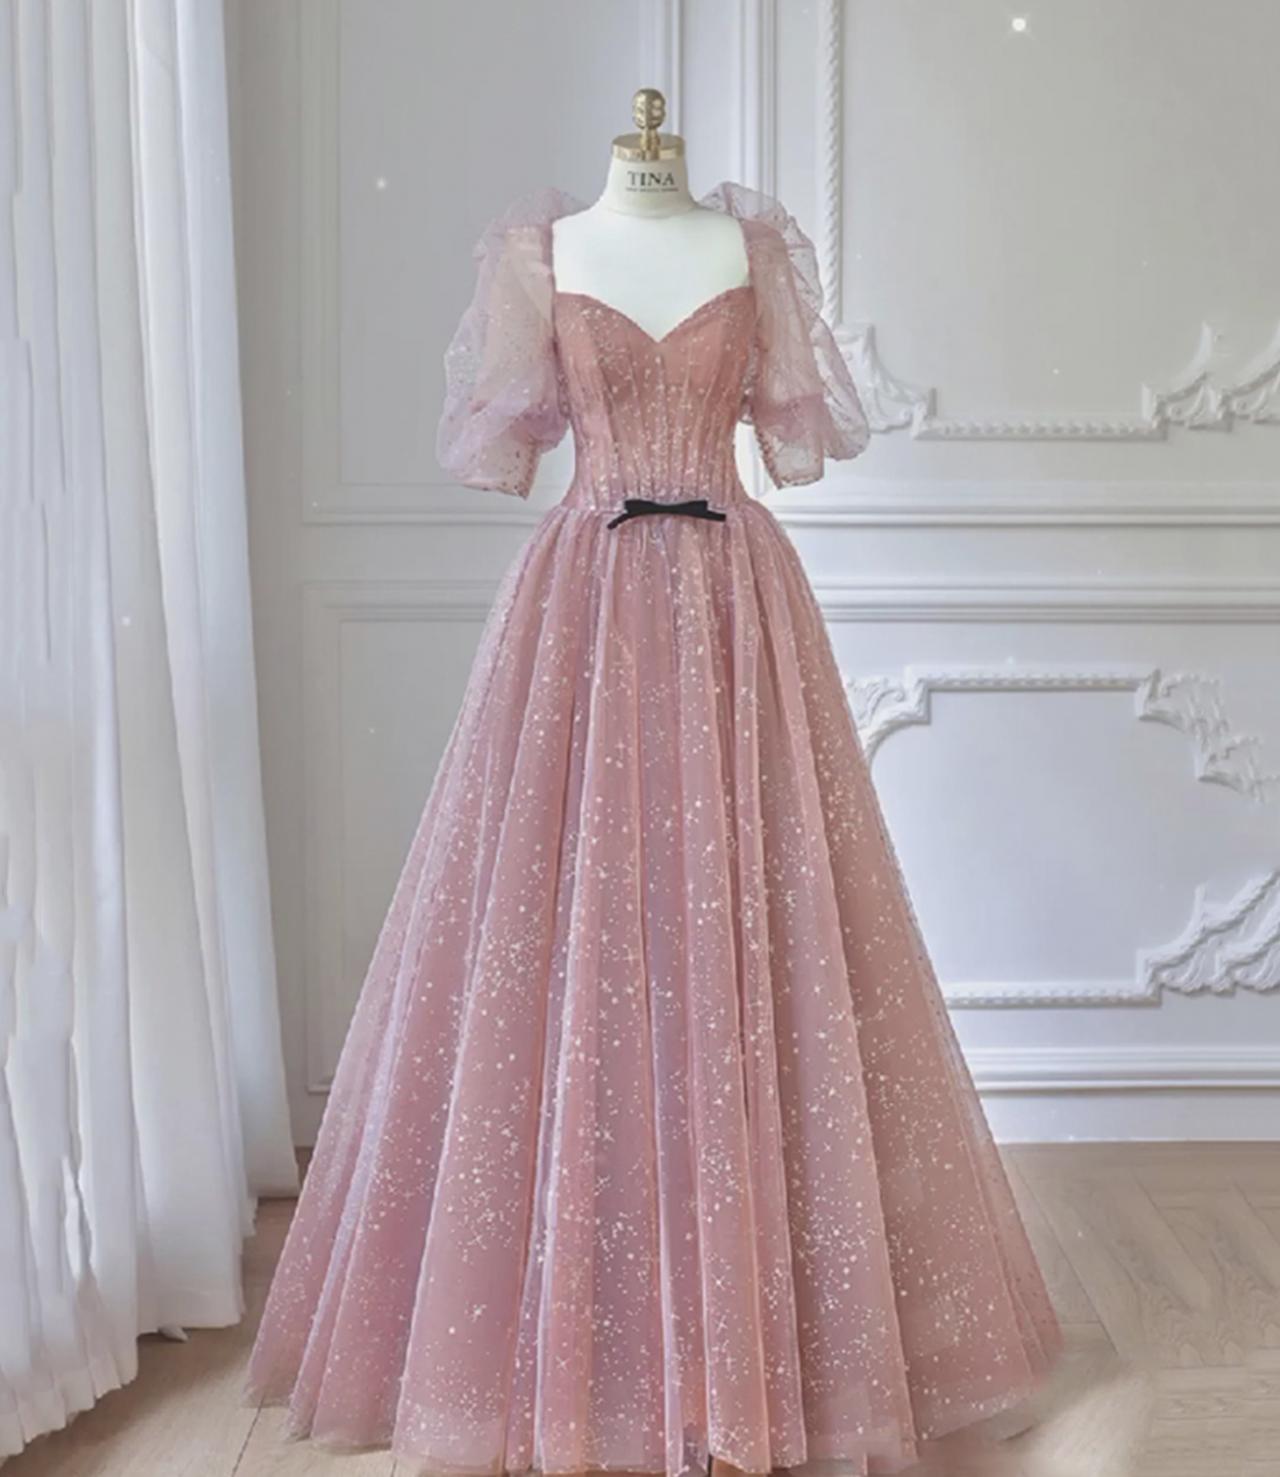 Pink Tulle Lace Long Ball Gown Dress Formal Dress